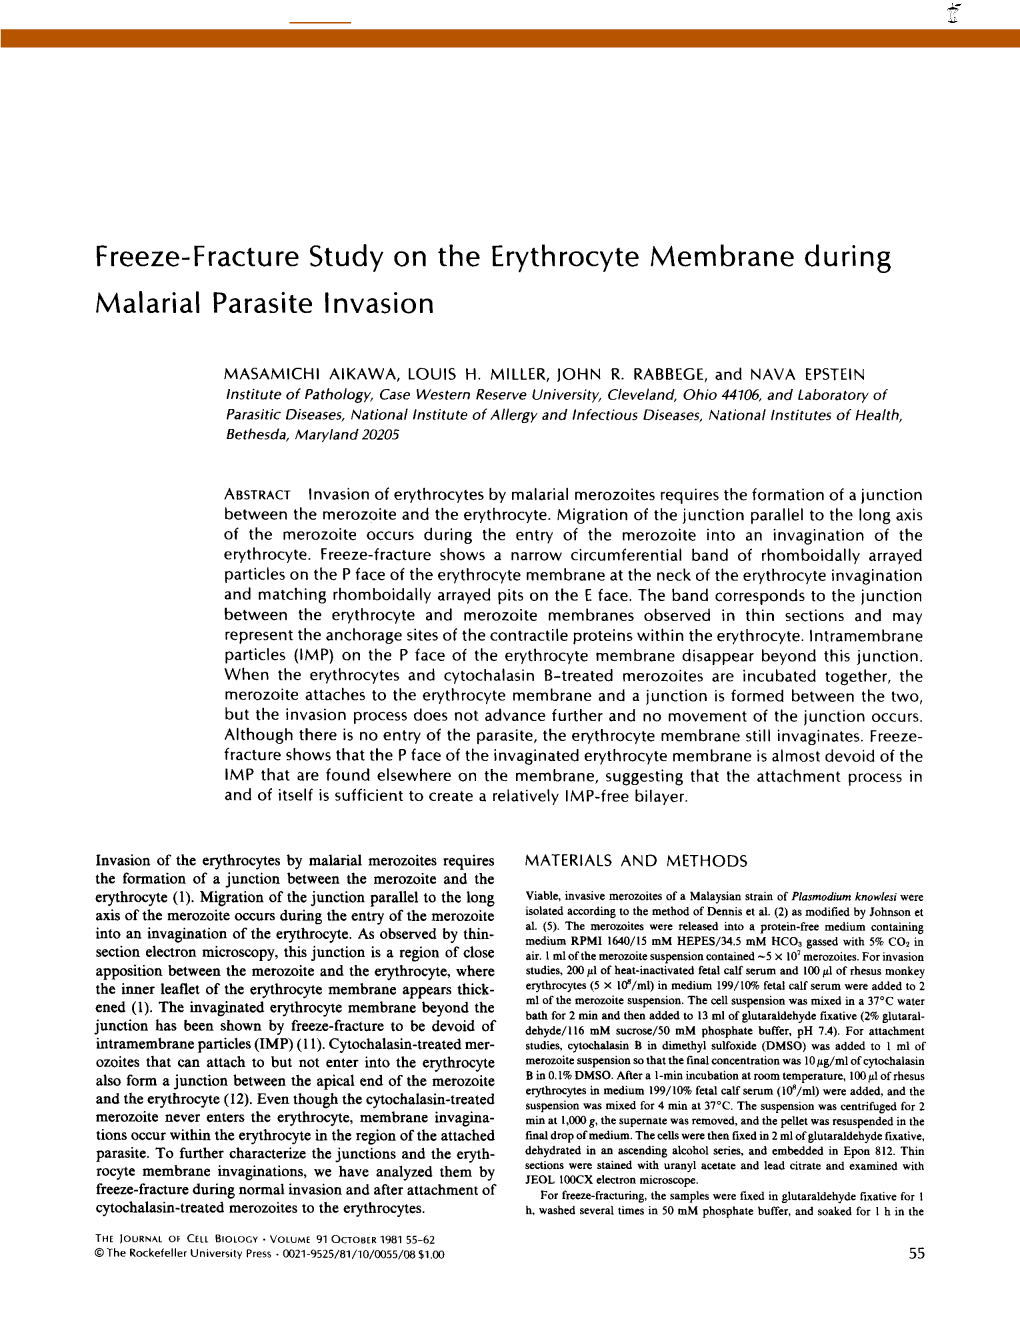 Freeze-Fracture Study on the Erythrocyte Membrane During Malarial Parasite Invasion